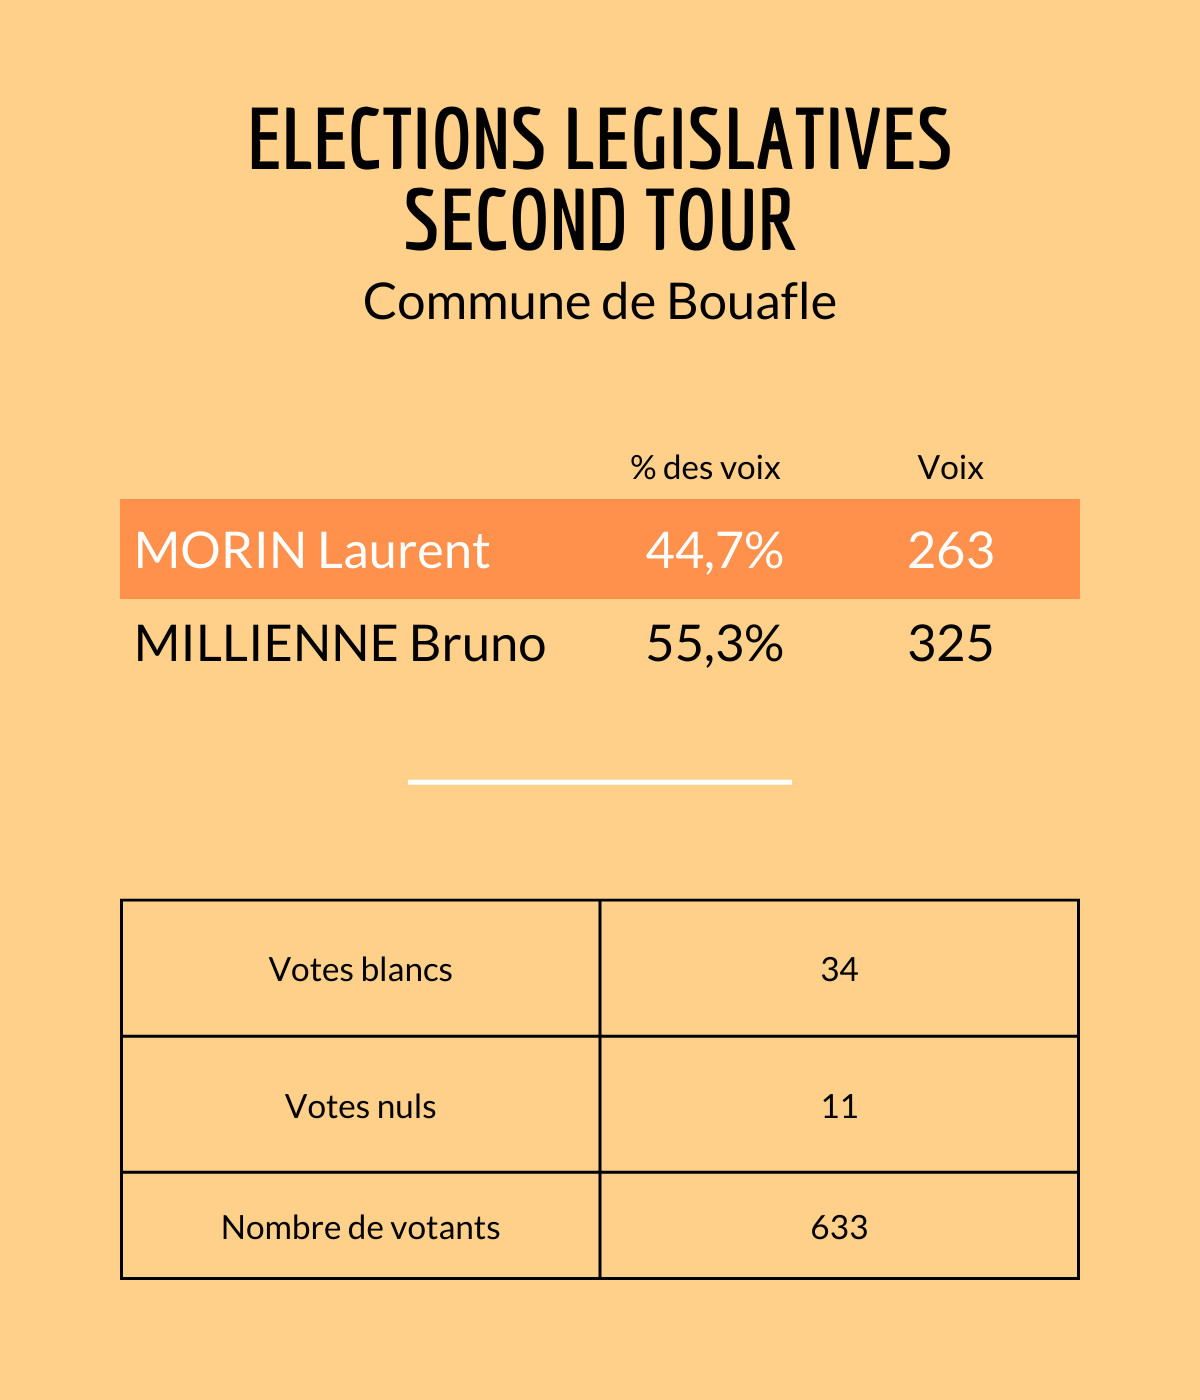 elections presidentielles _1_.png